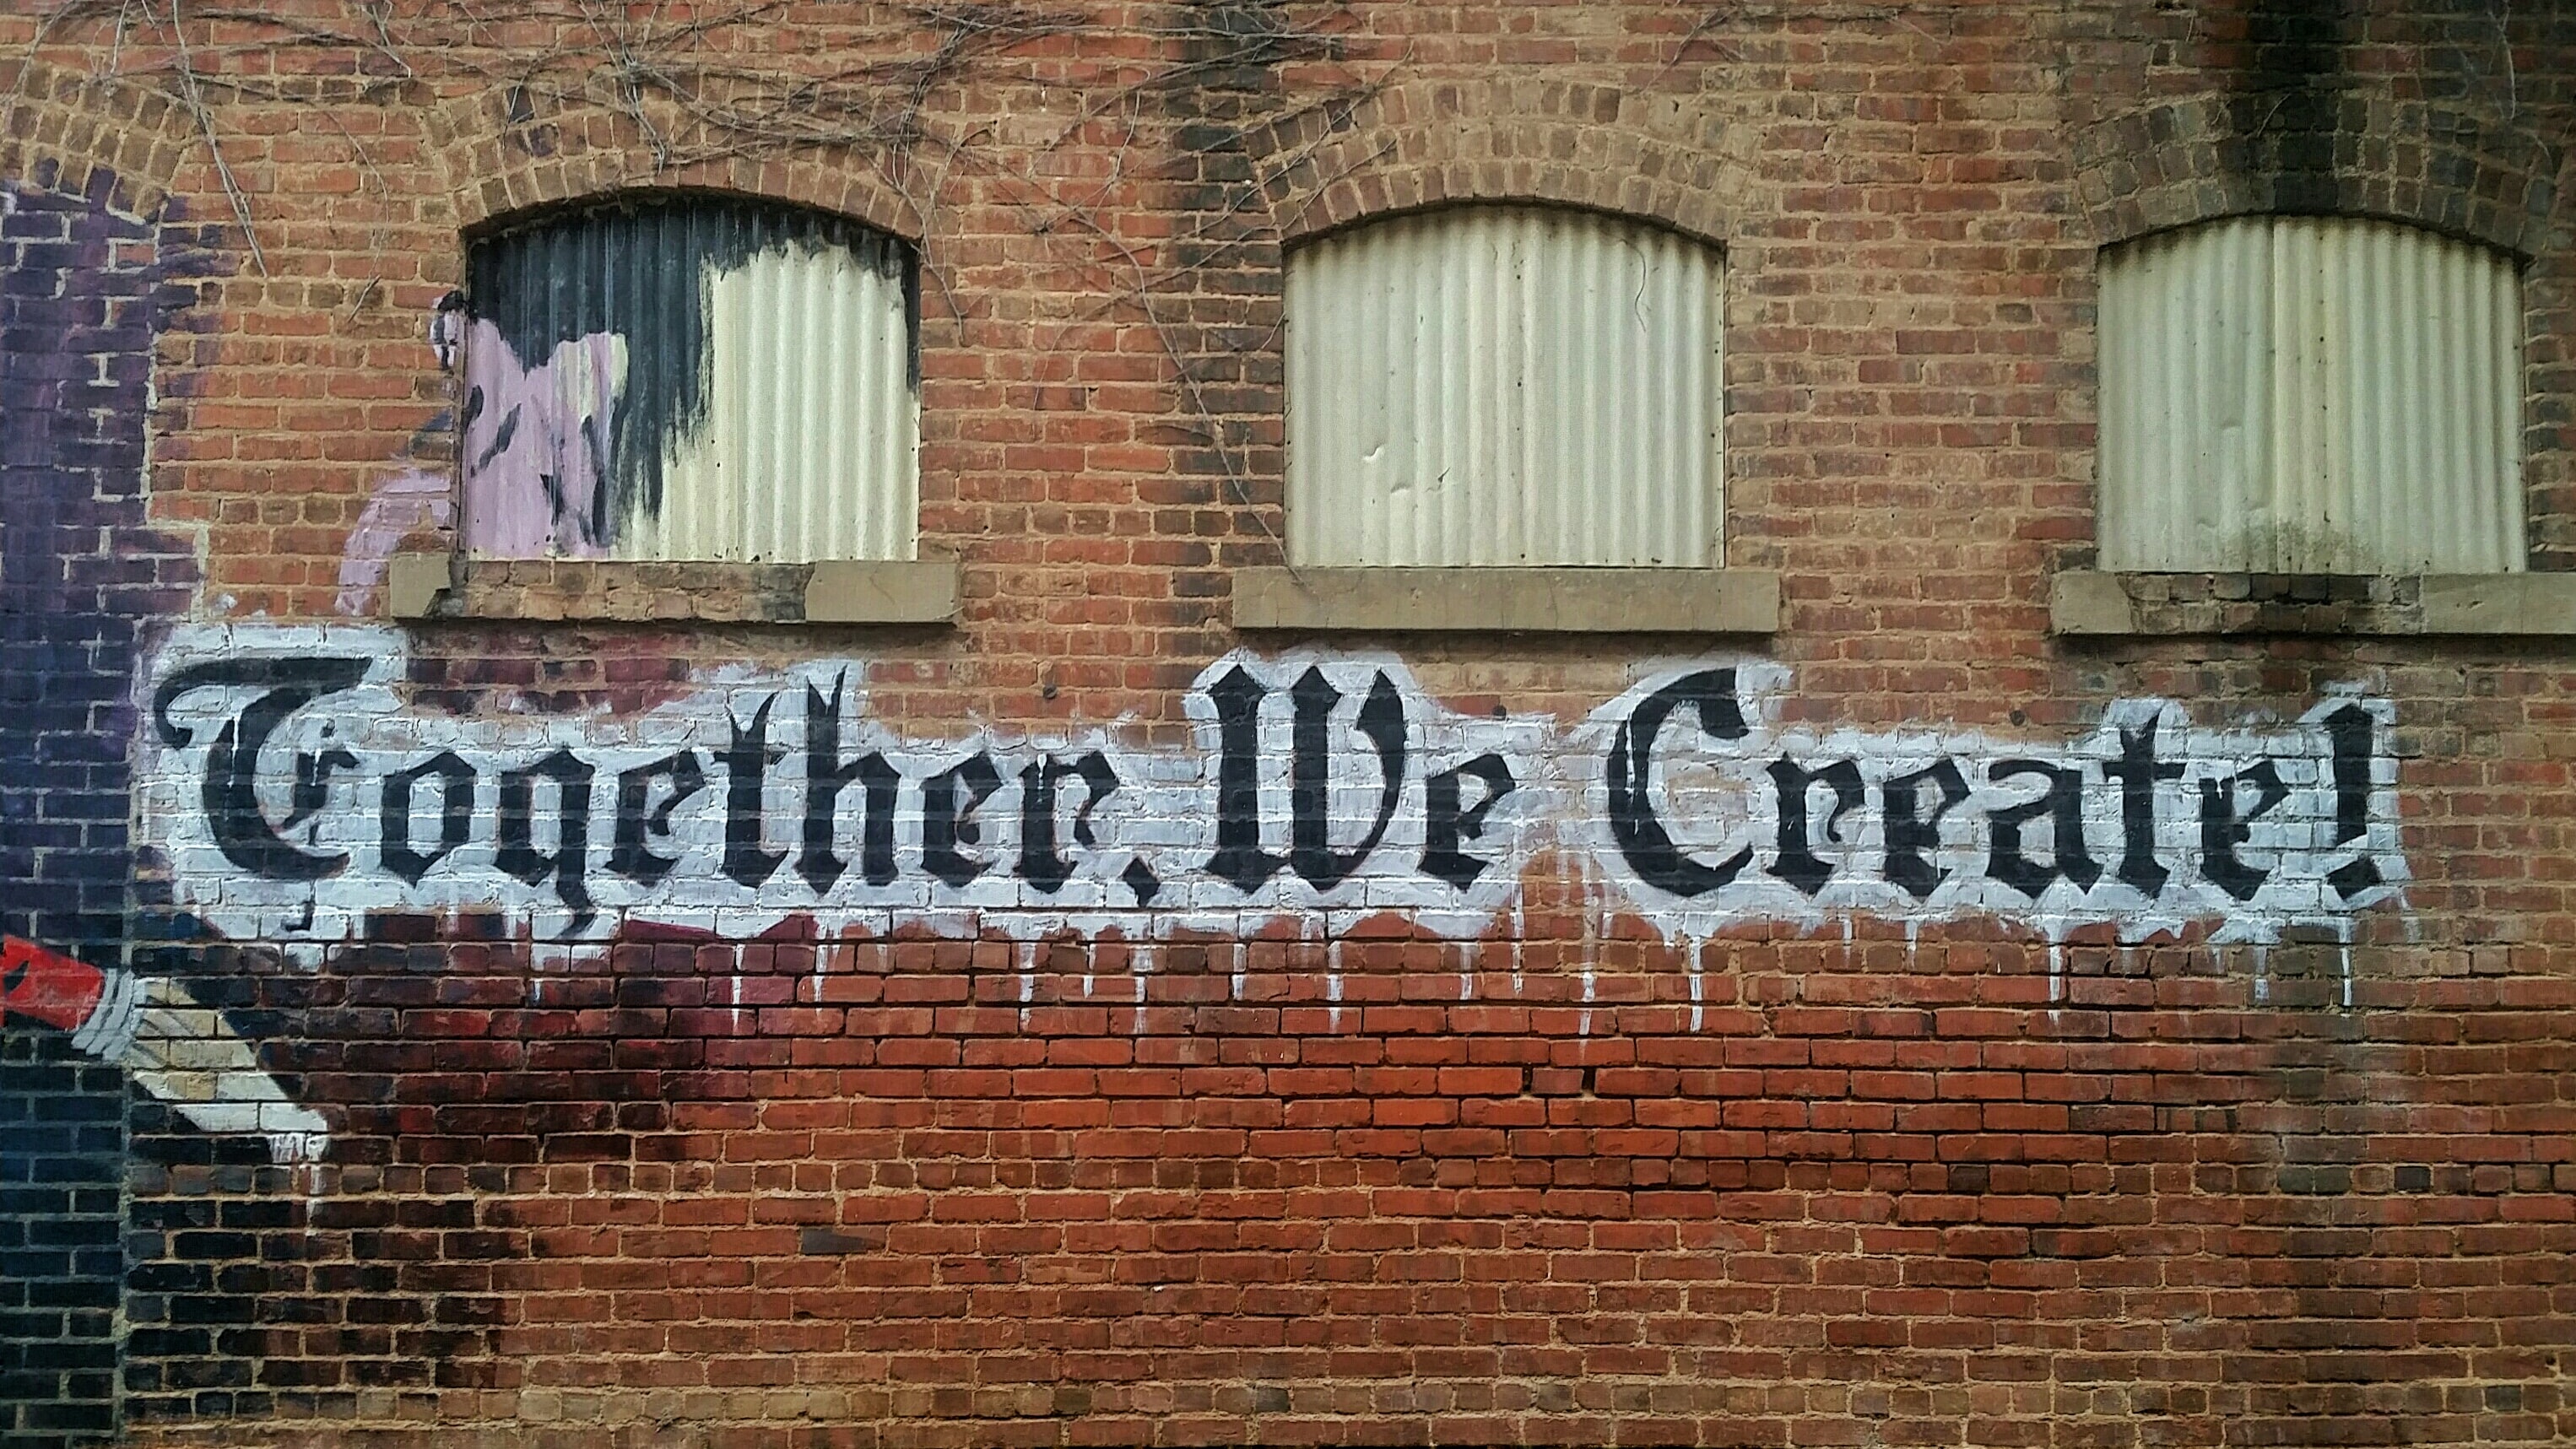 Brick building with "Together we Create" written as graffiti